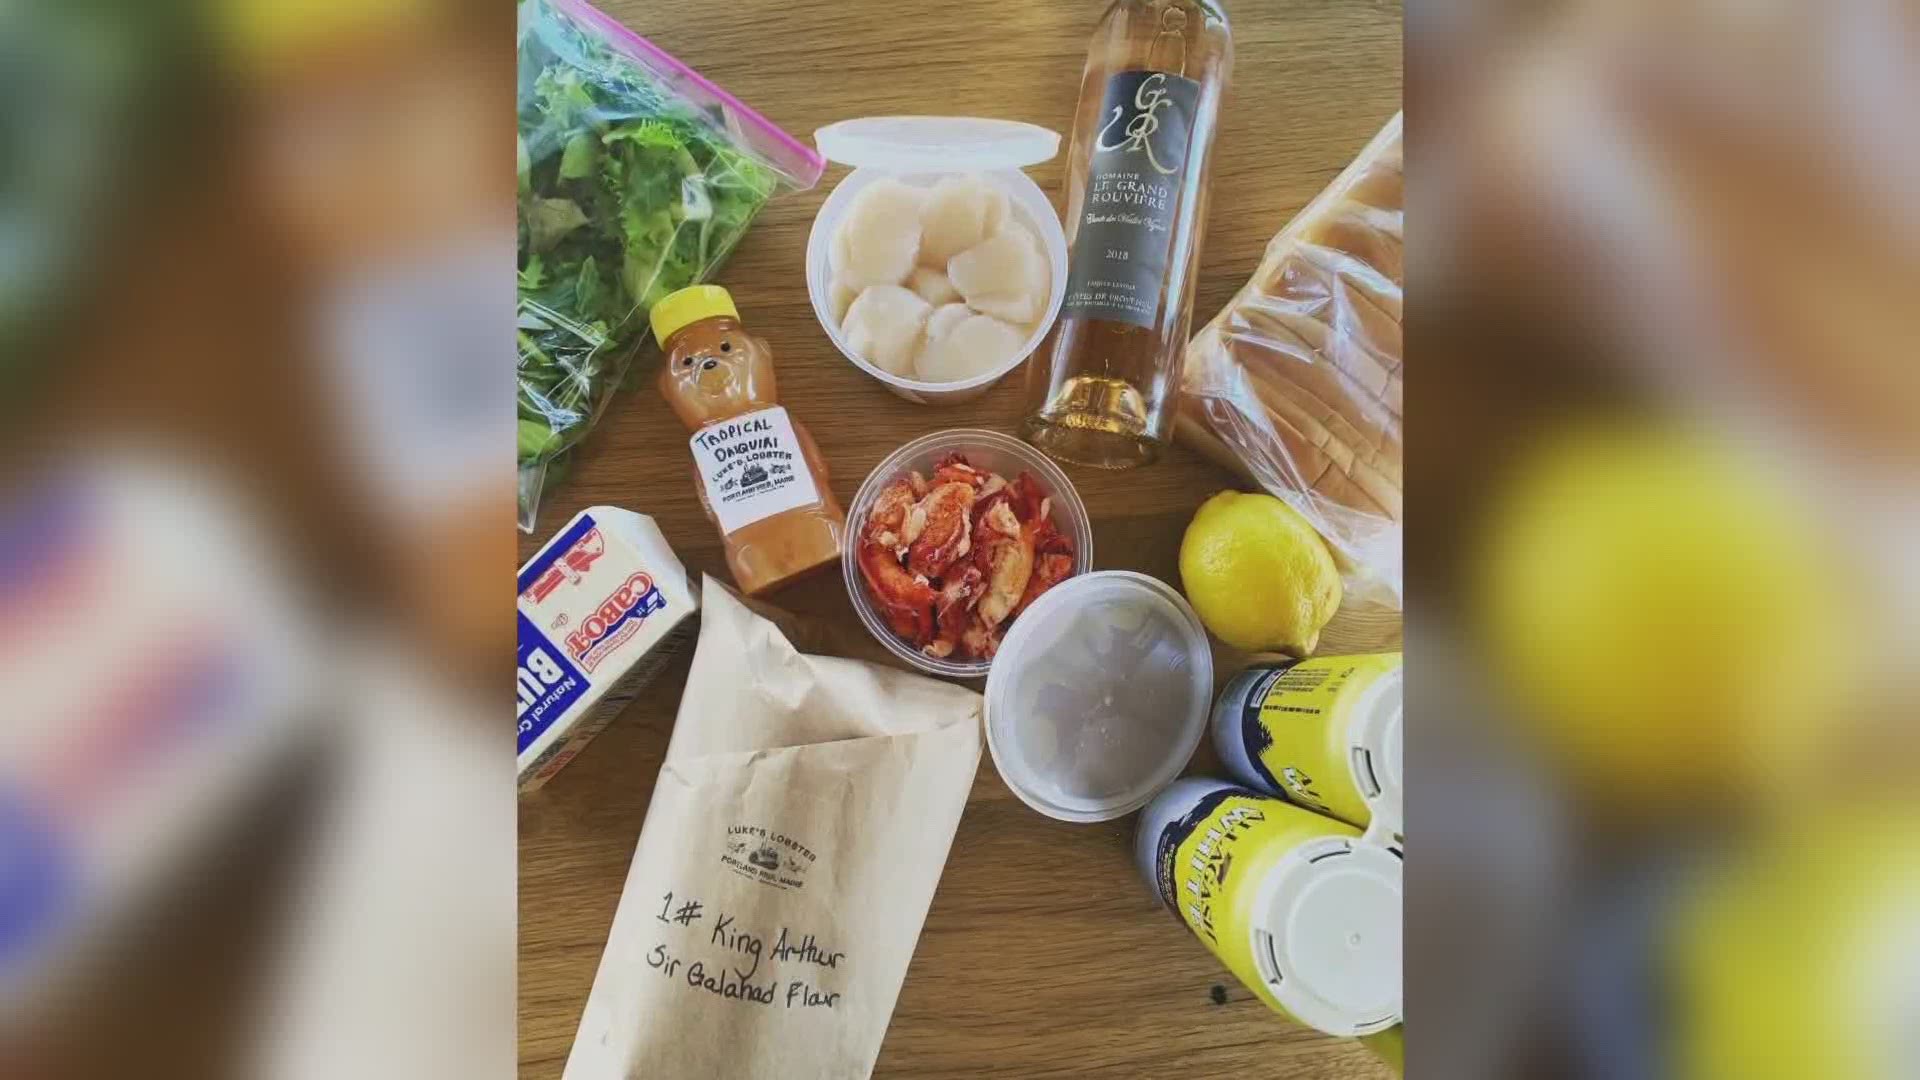 Luke's Lobster in Portland is selling everyday food items along with its lobsters.